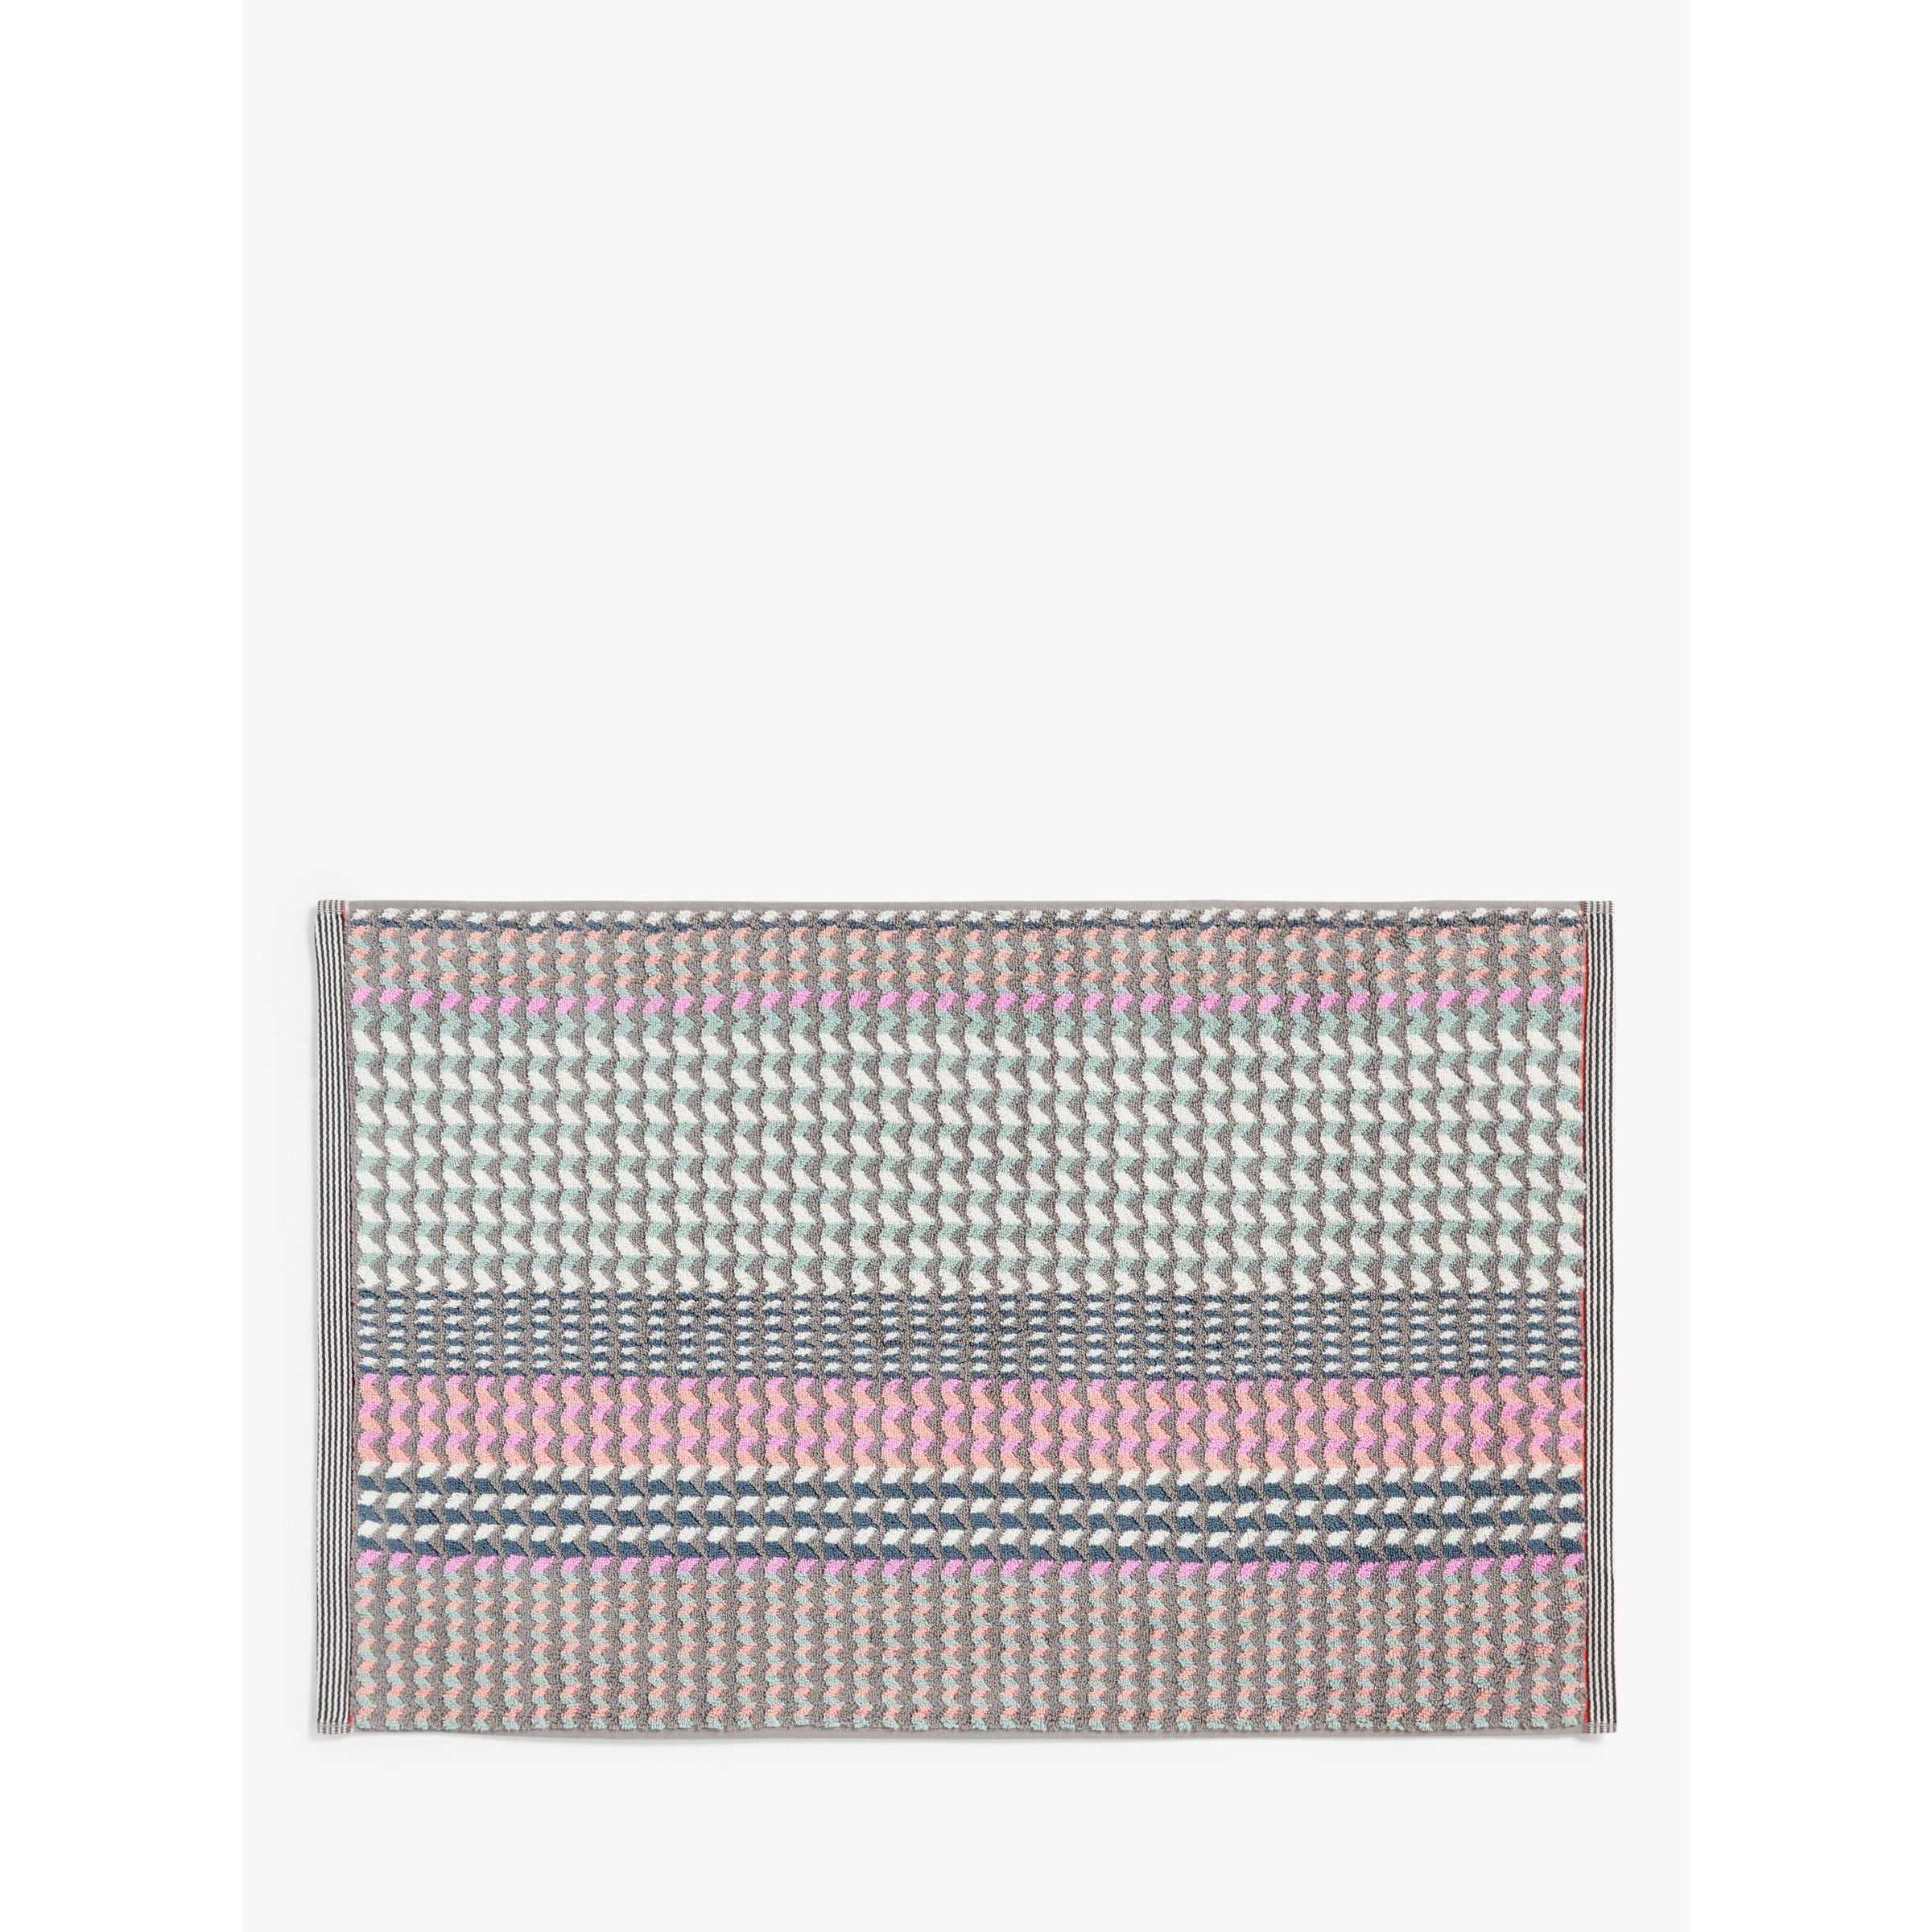 Margo Selby Camber Bath Mat - image 1